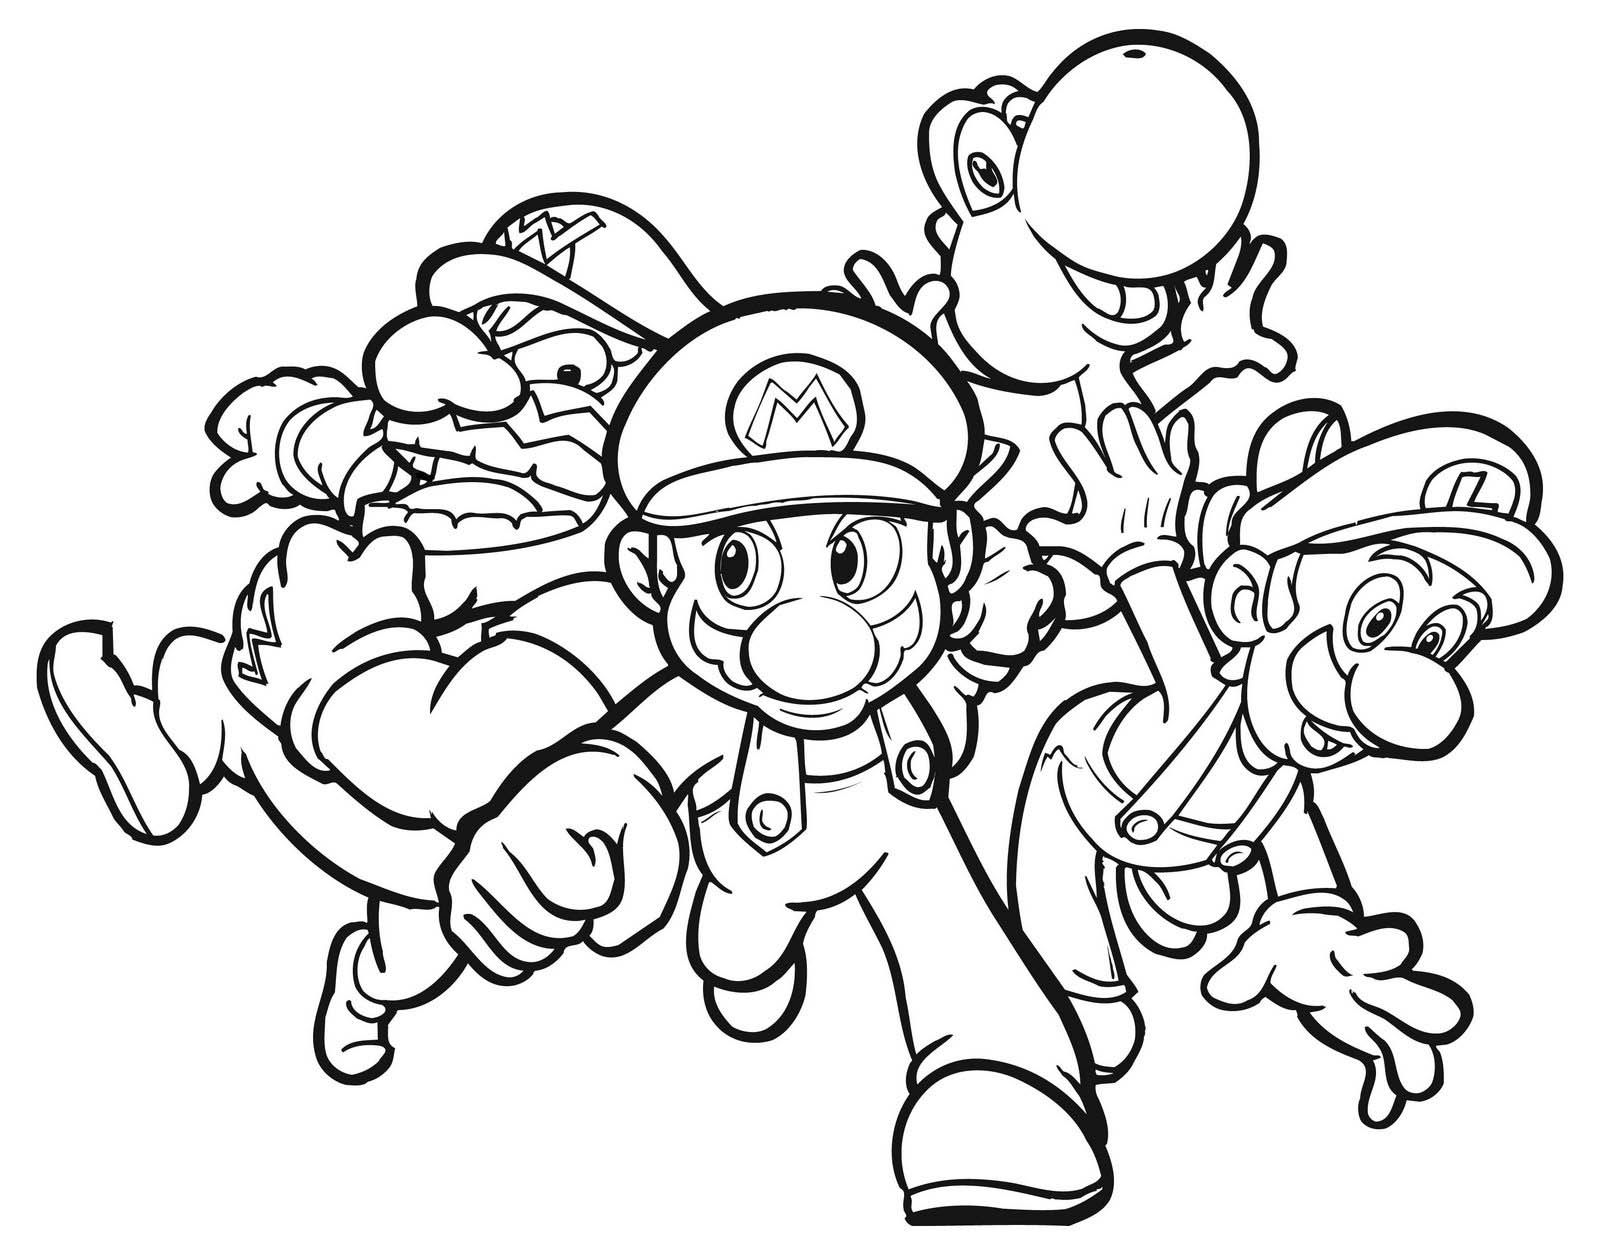 Yoshi Coloring Pages To Print Mario Yoshi Coloring Pages At Getdrawings Free For Personal